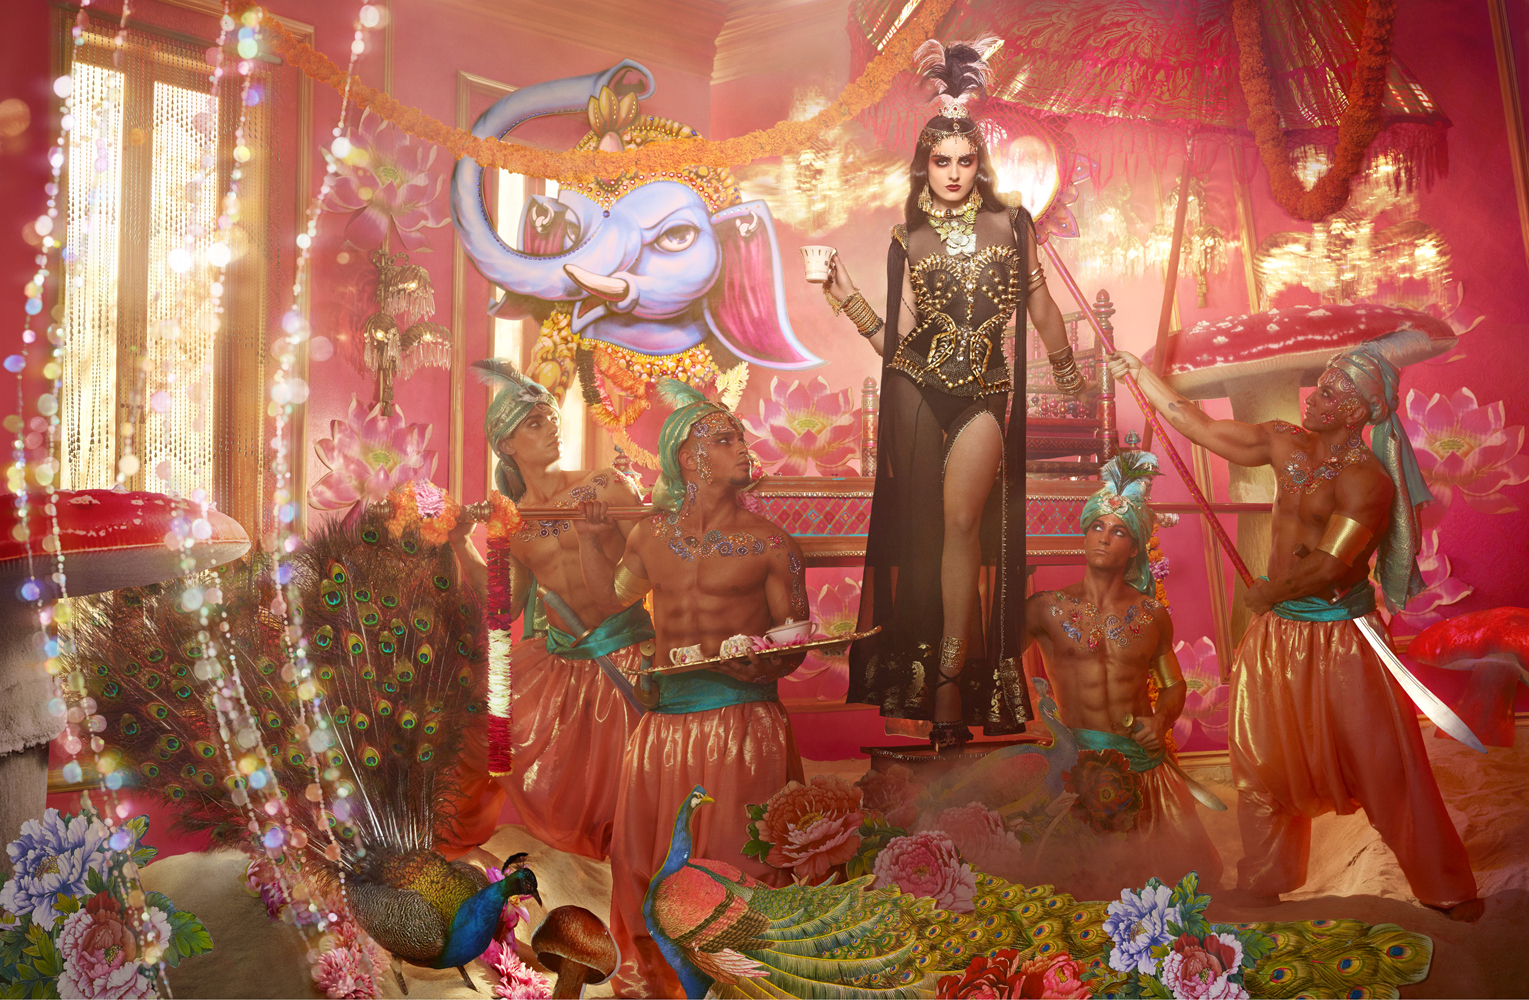 David LaChapelle | Advertising | SPECIAL T  | 75